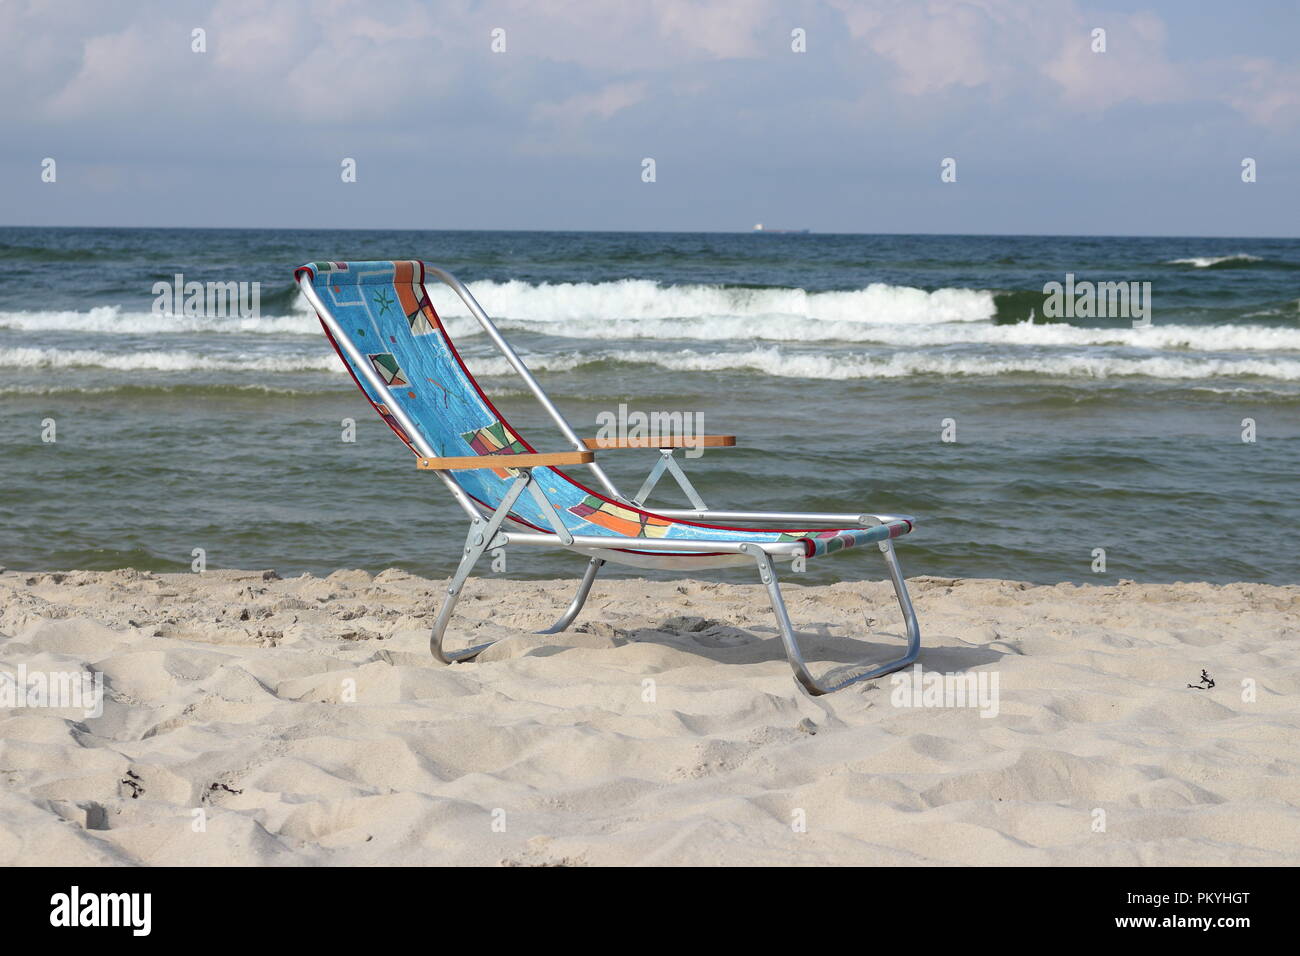 Empty deckchair on the beach in September, end of summer season by the sea Stock Photo